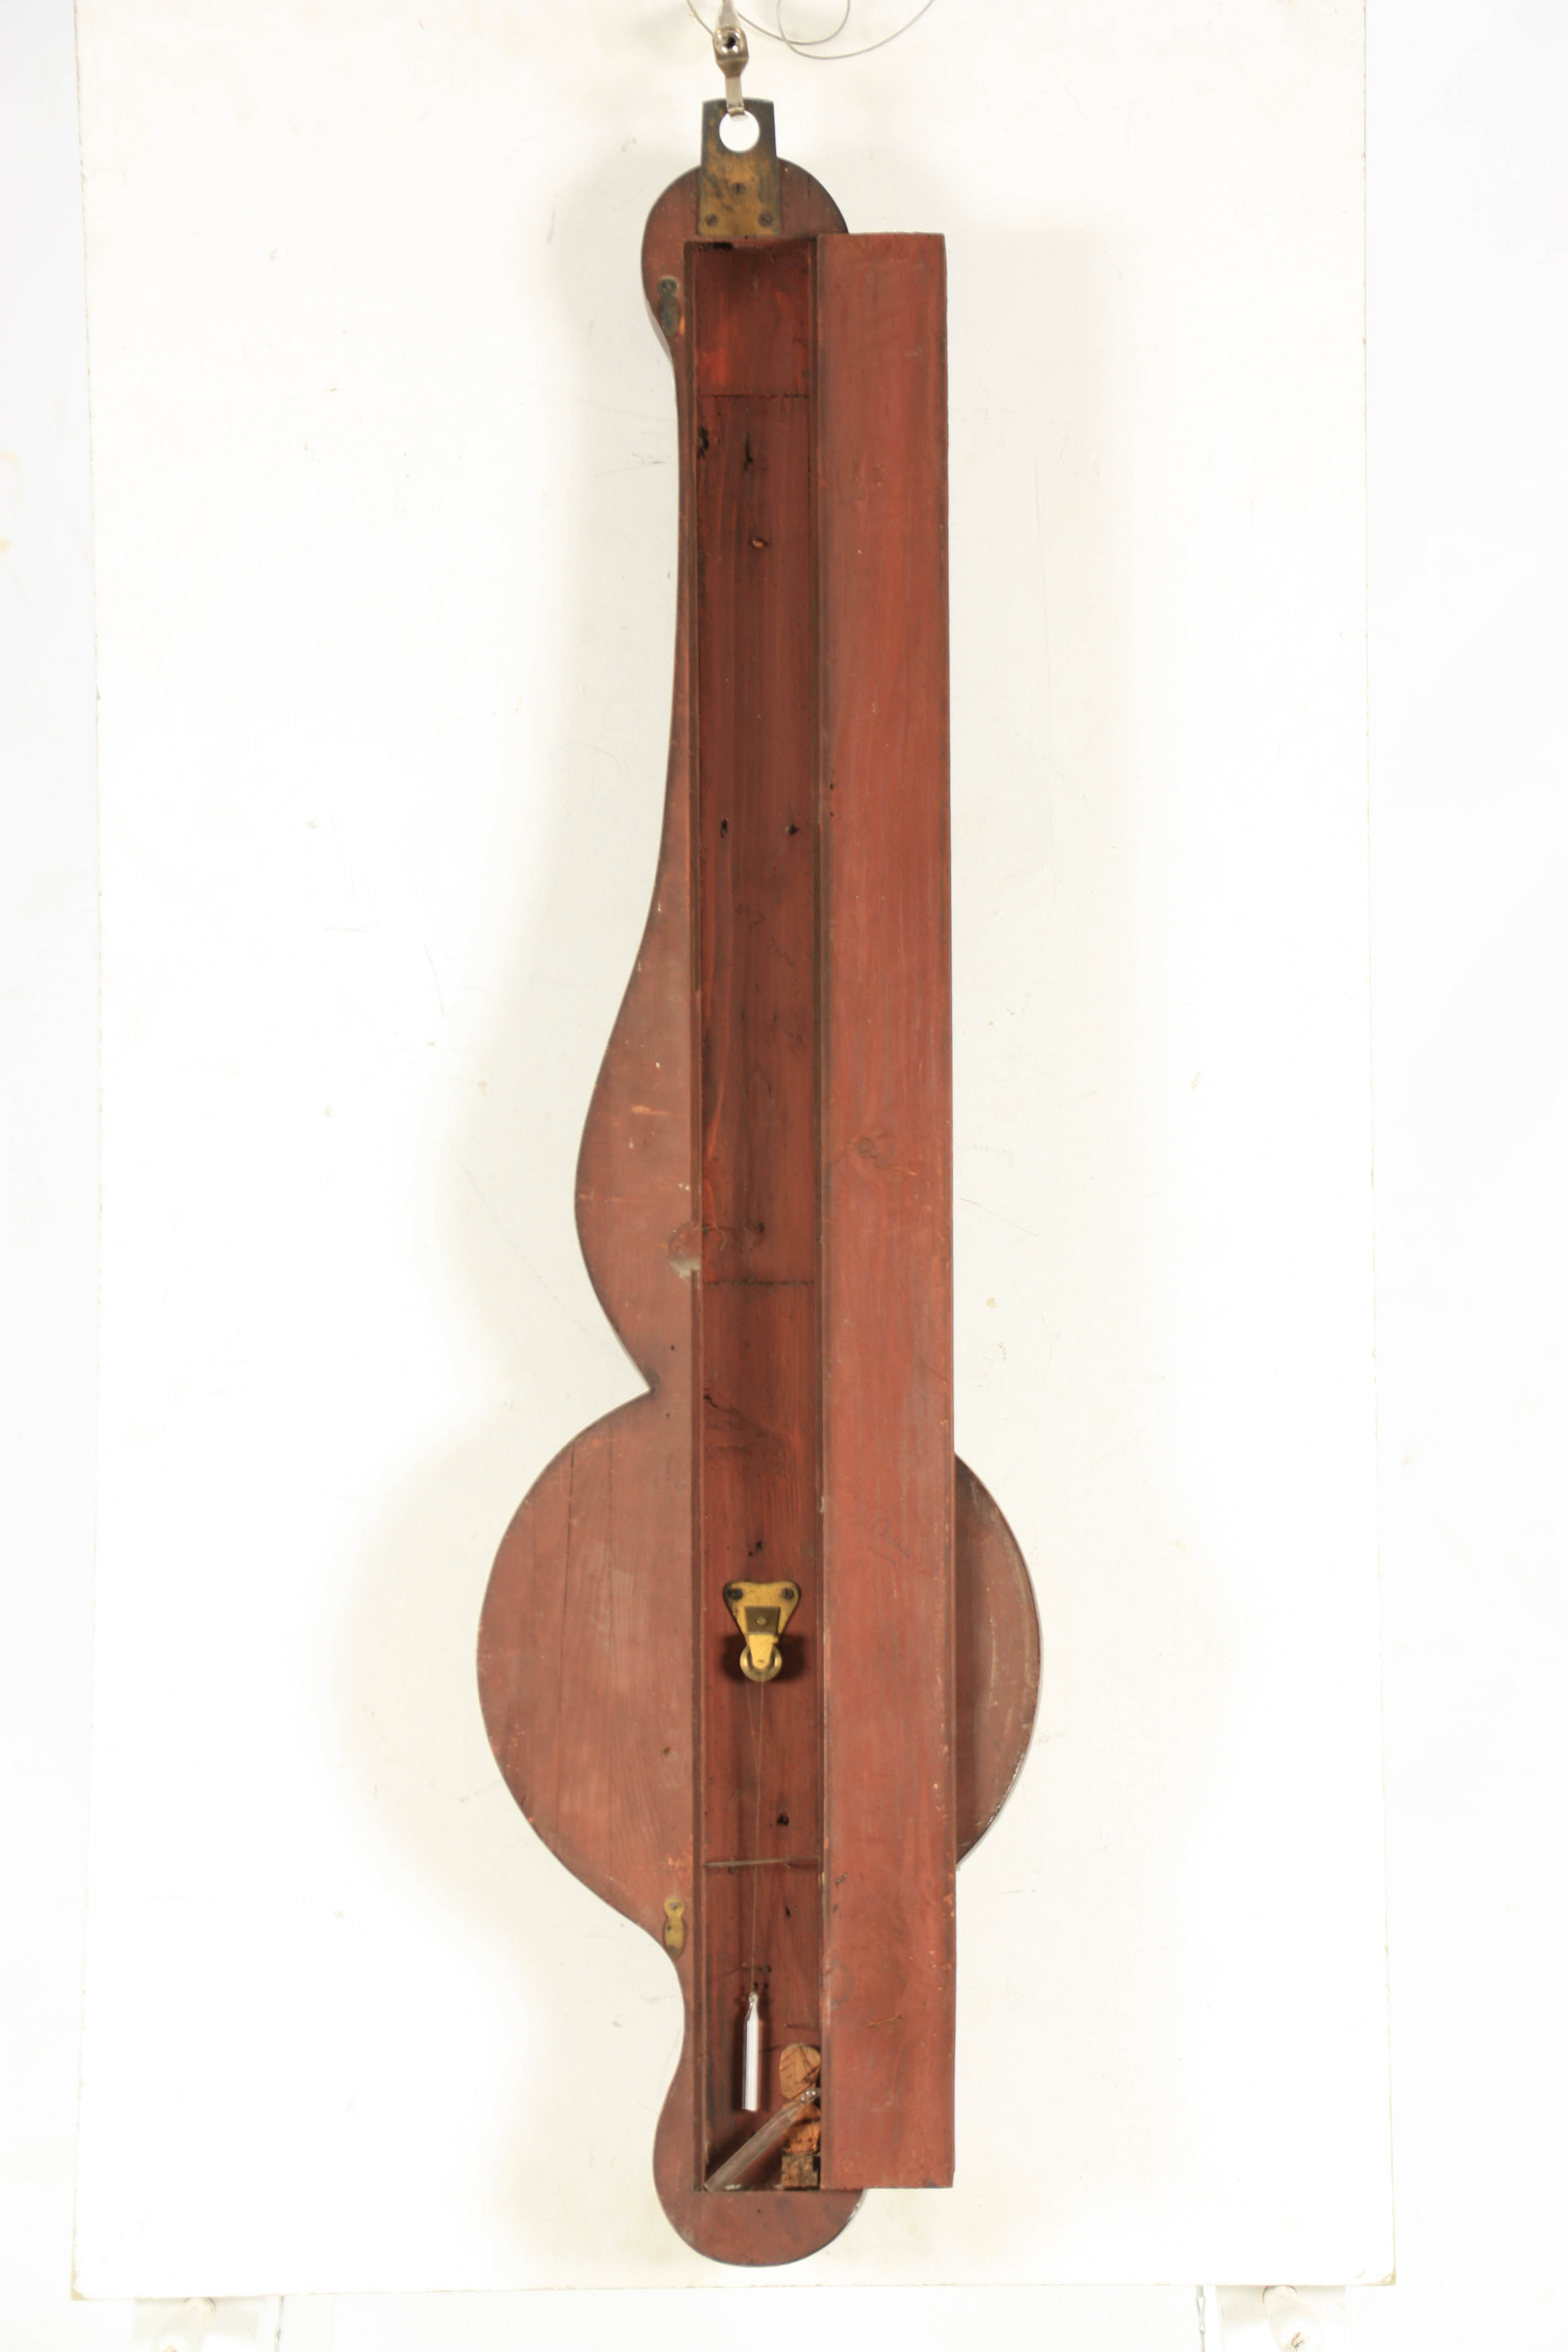 CHARLES TARELLI, BANBURY A LATE GEORGE III SHELL INLAID WHEEL BAROMETER the mahogany case with - Image 6 of 6